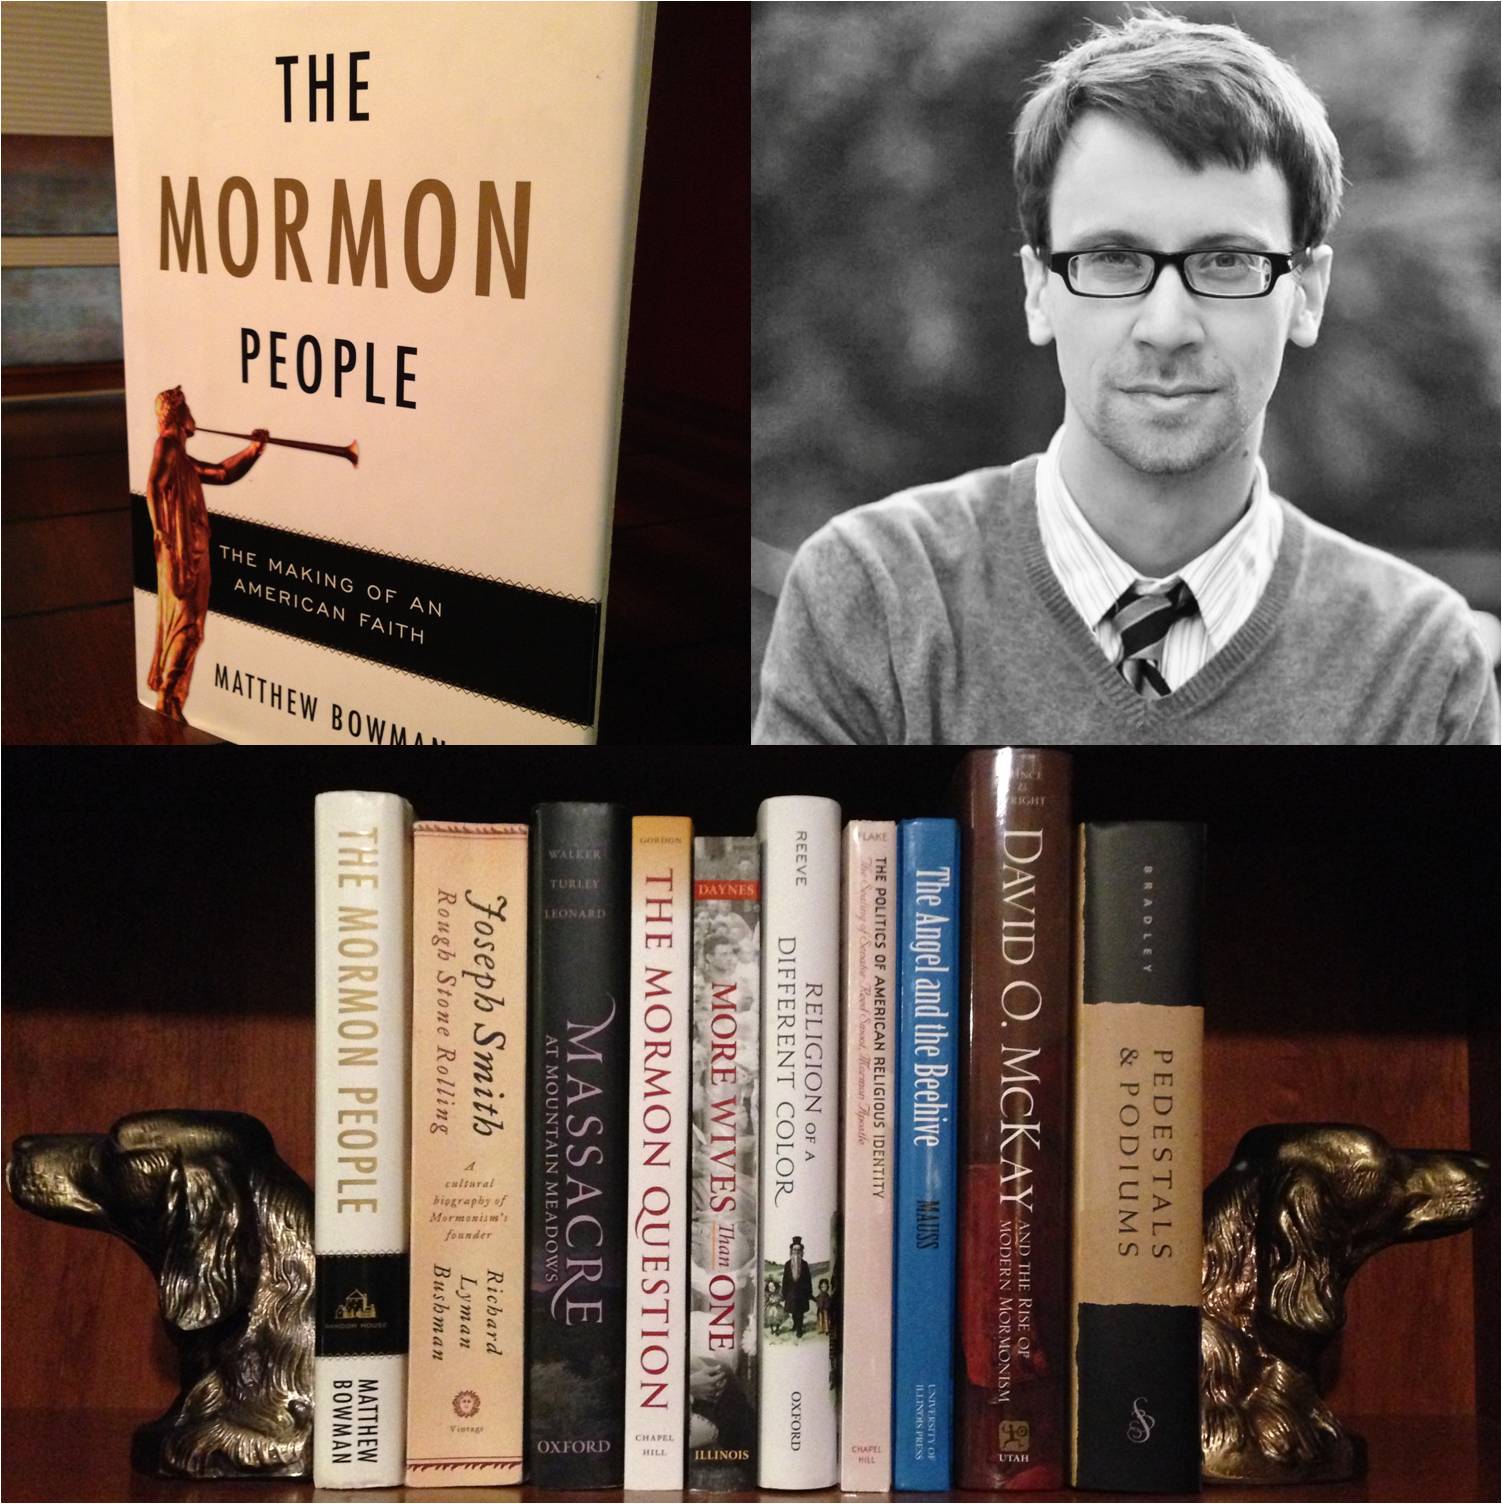 50: Top Ten Books on Mormon History – The Mormon People: The Making of an American Faith